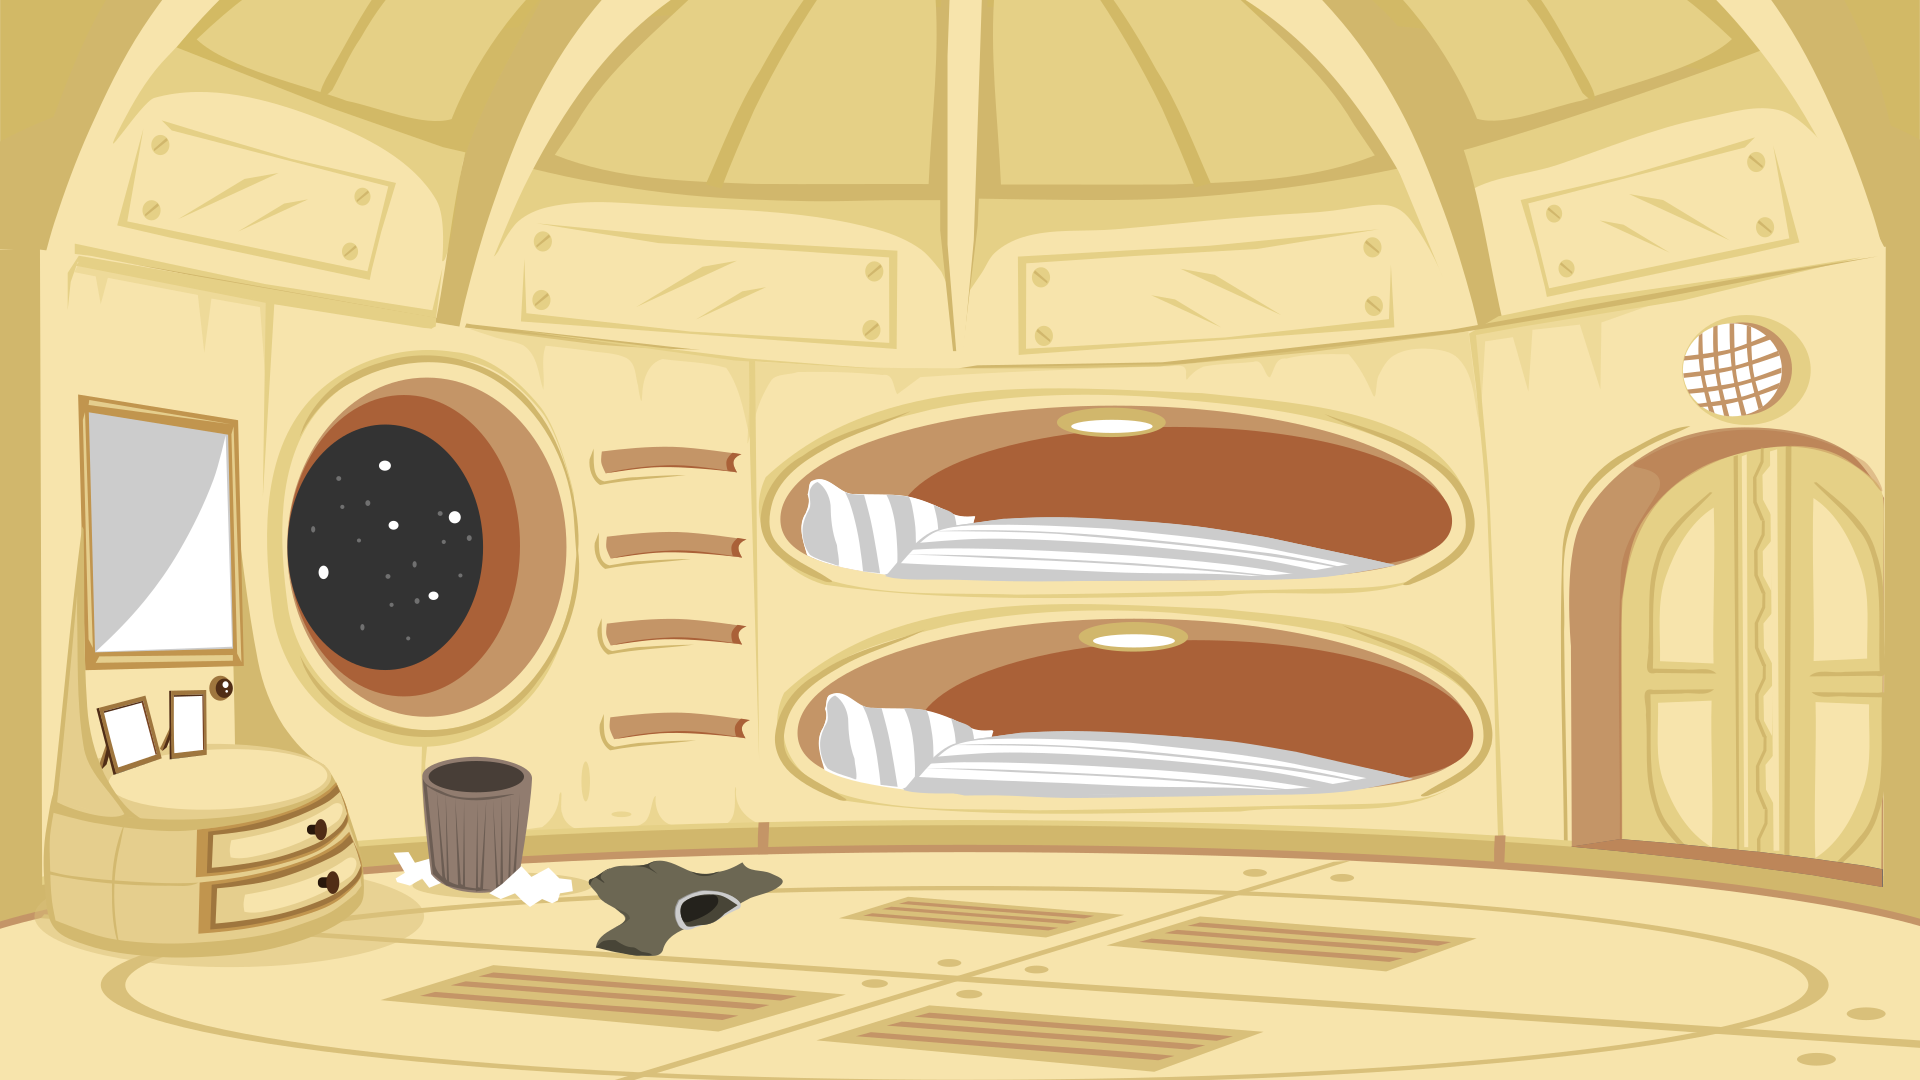 Background for Spaceship Adventure | OpenGameArt.org